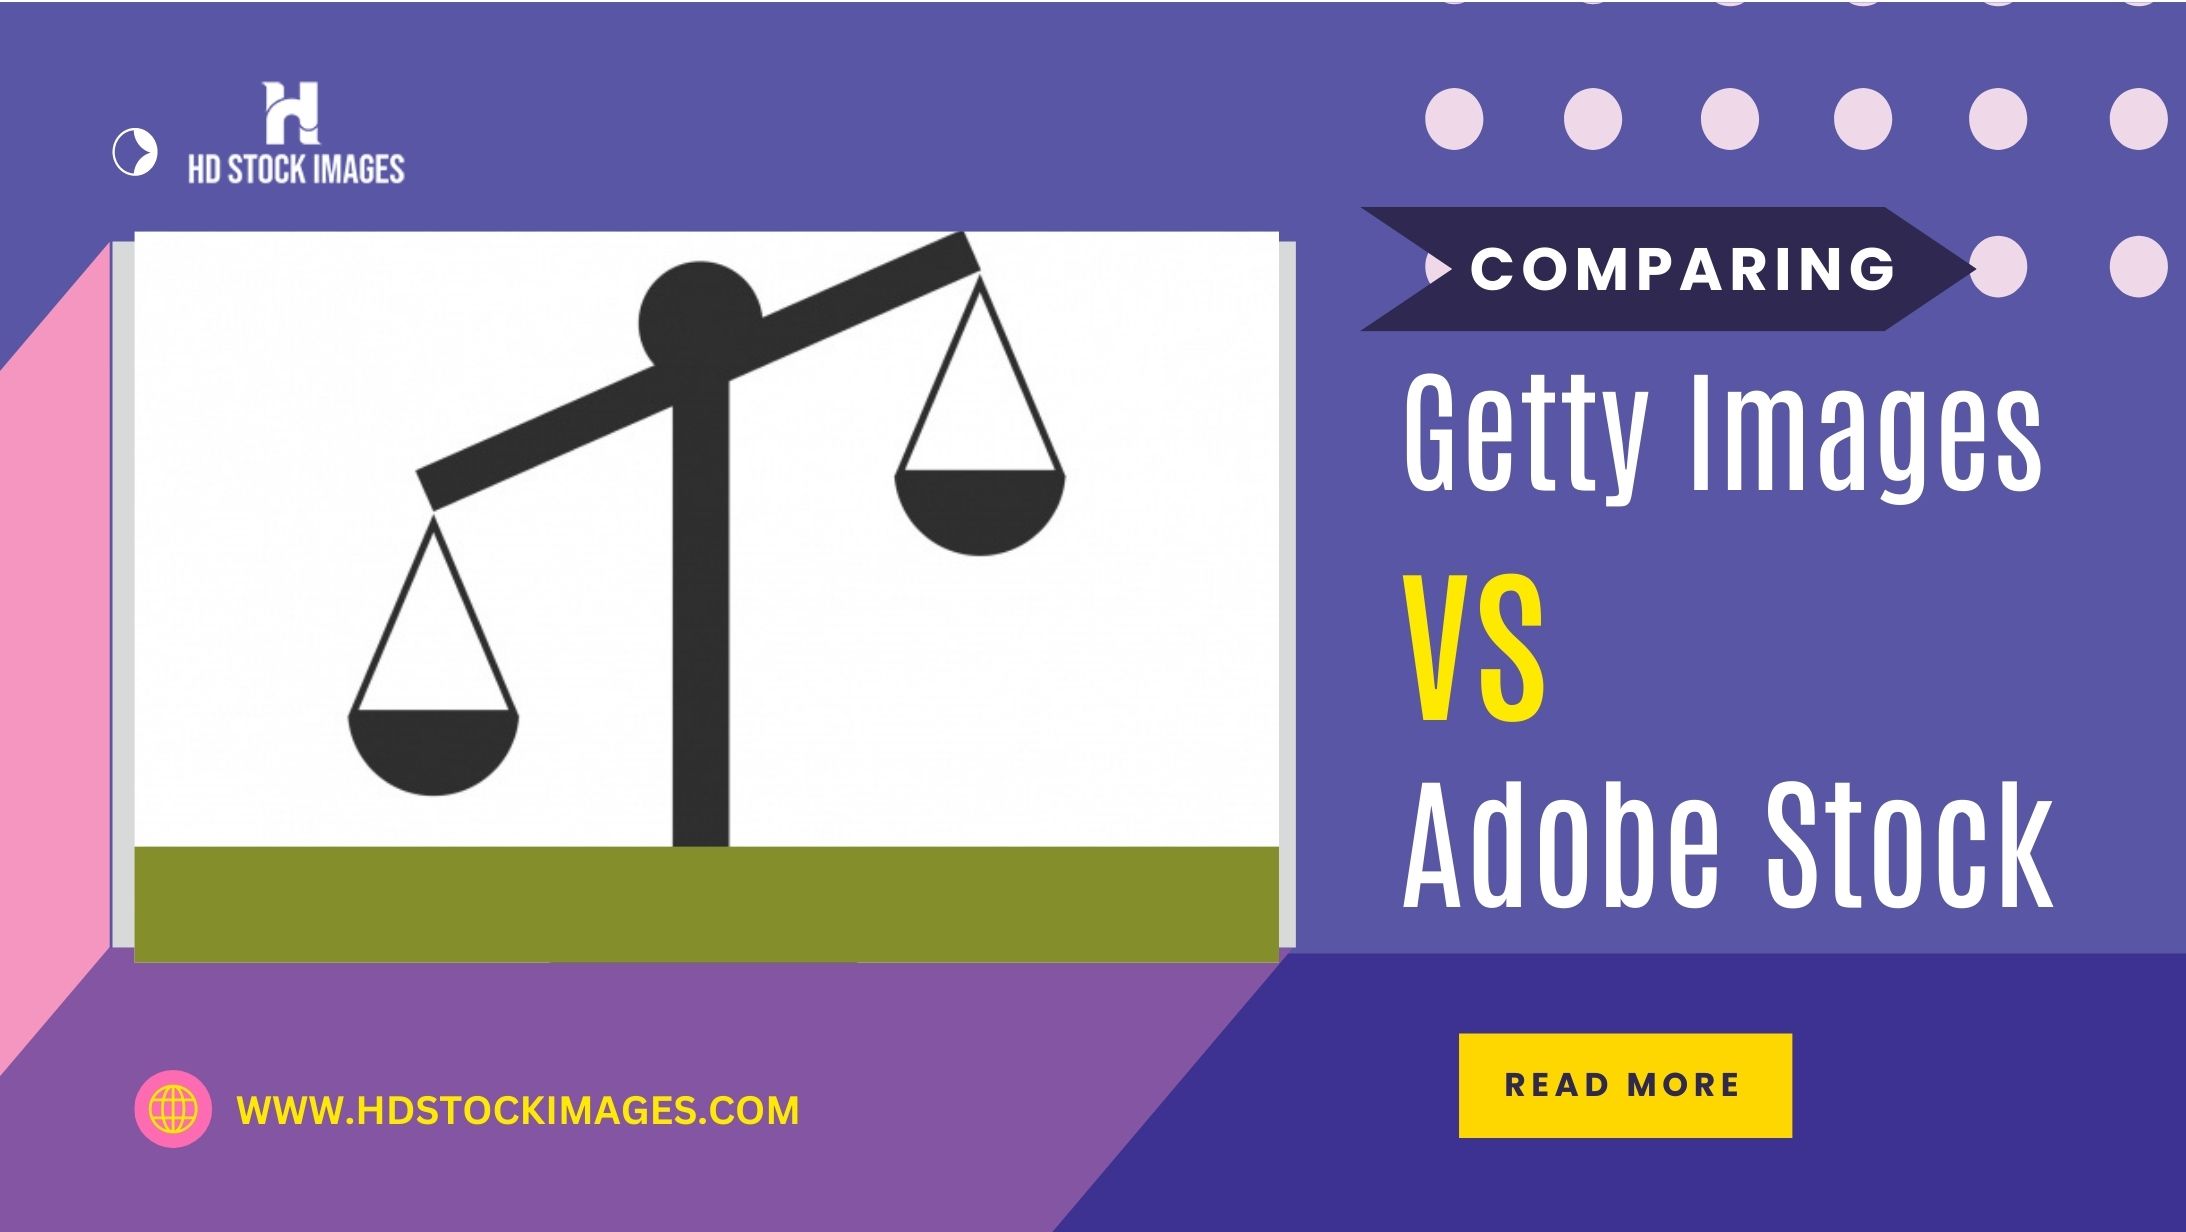 an image of Getty Images vs Adobe Stock: Comparing Two Prominent Stock Image Providers